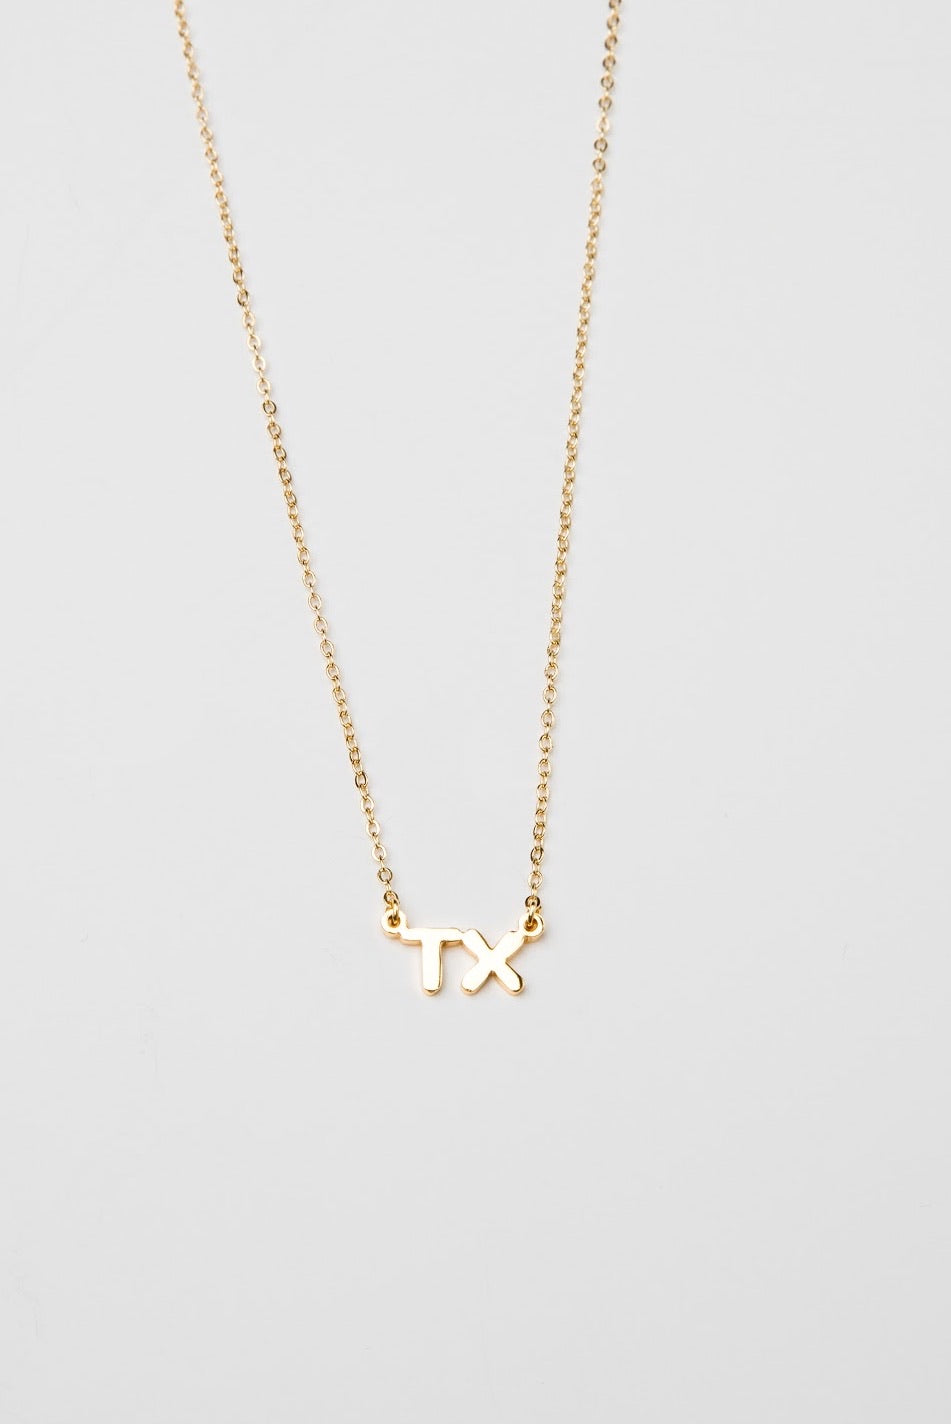 TEXAS INITIAL NECKLACE